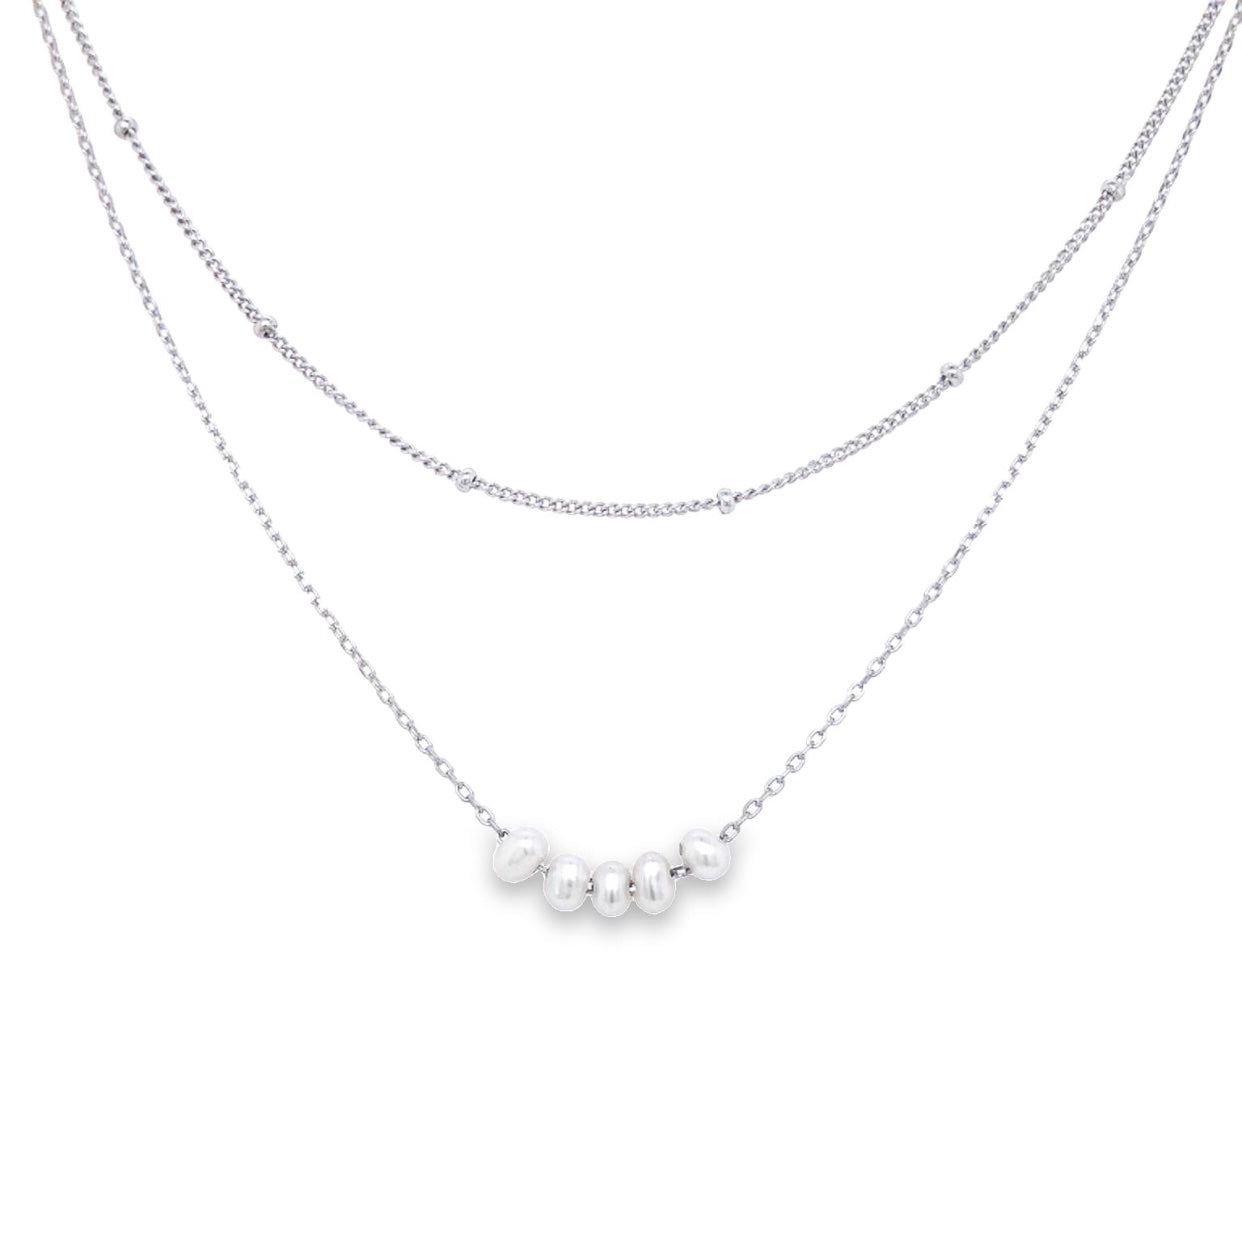 Onatah Sterling Silver Layered Pearl Necklace